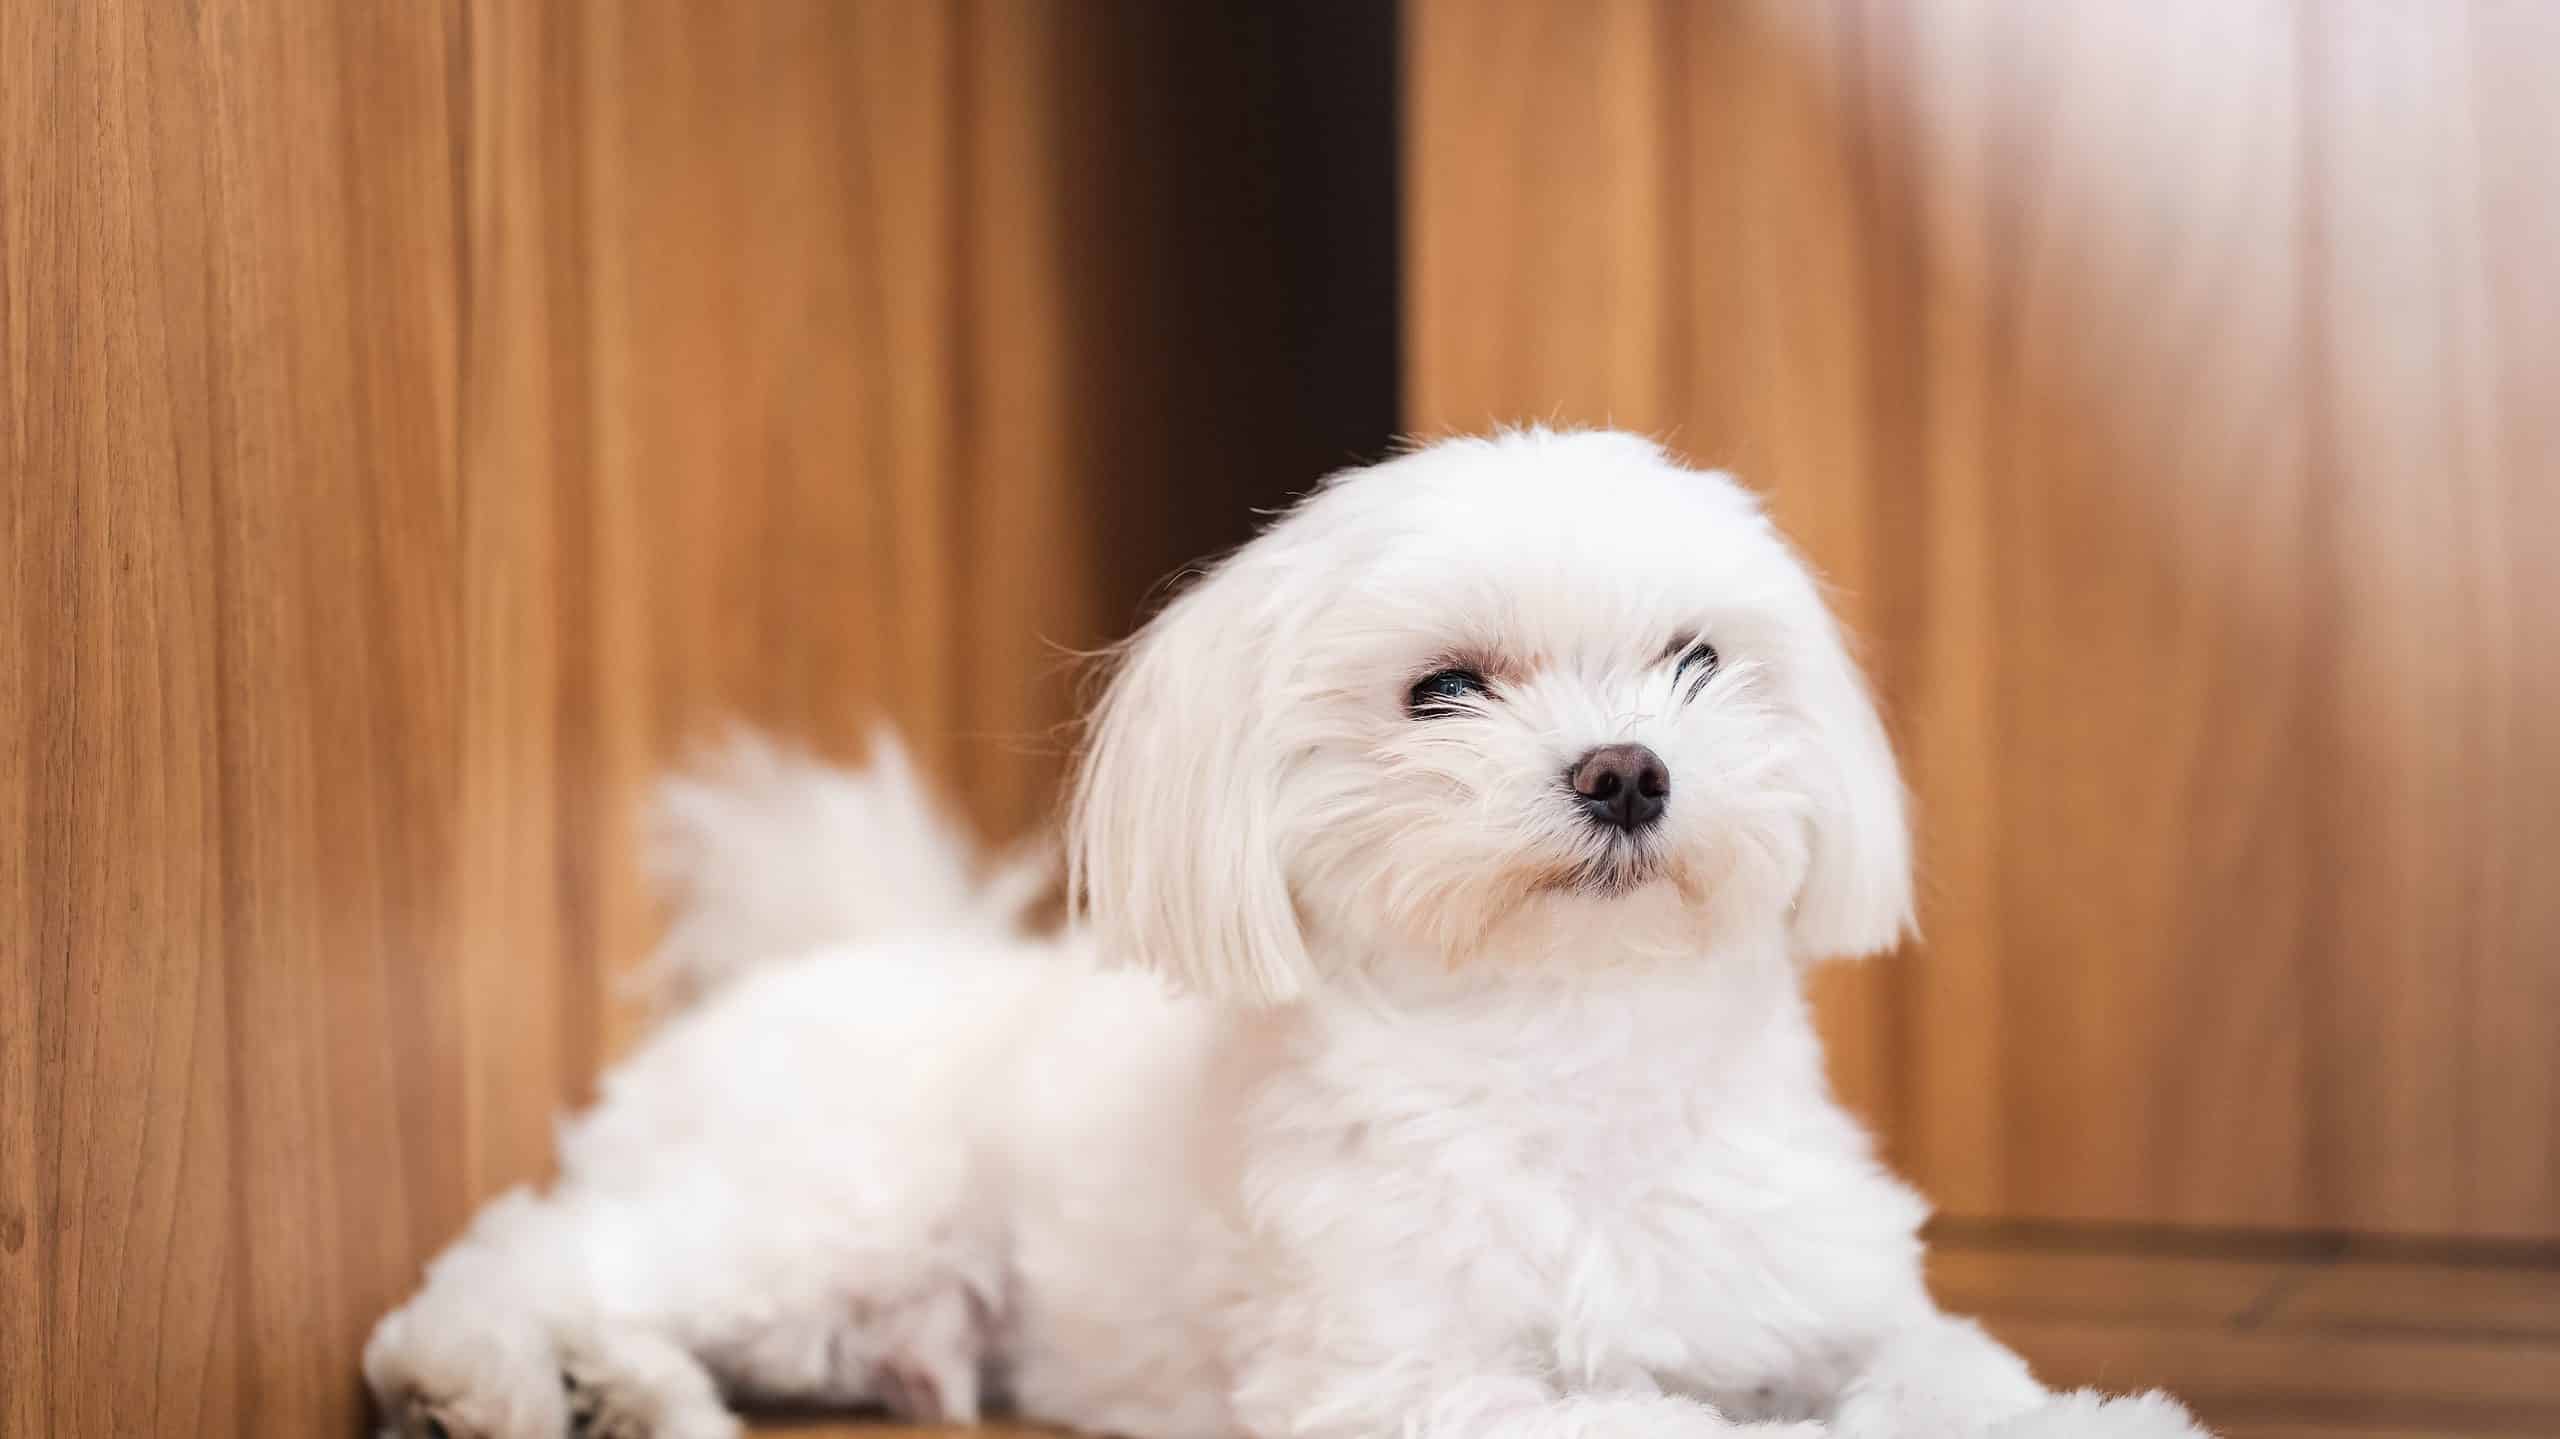 How Old Is The Oldest Maltese Ever? - Az Animals